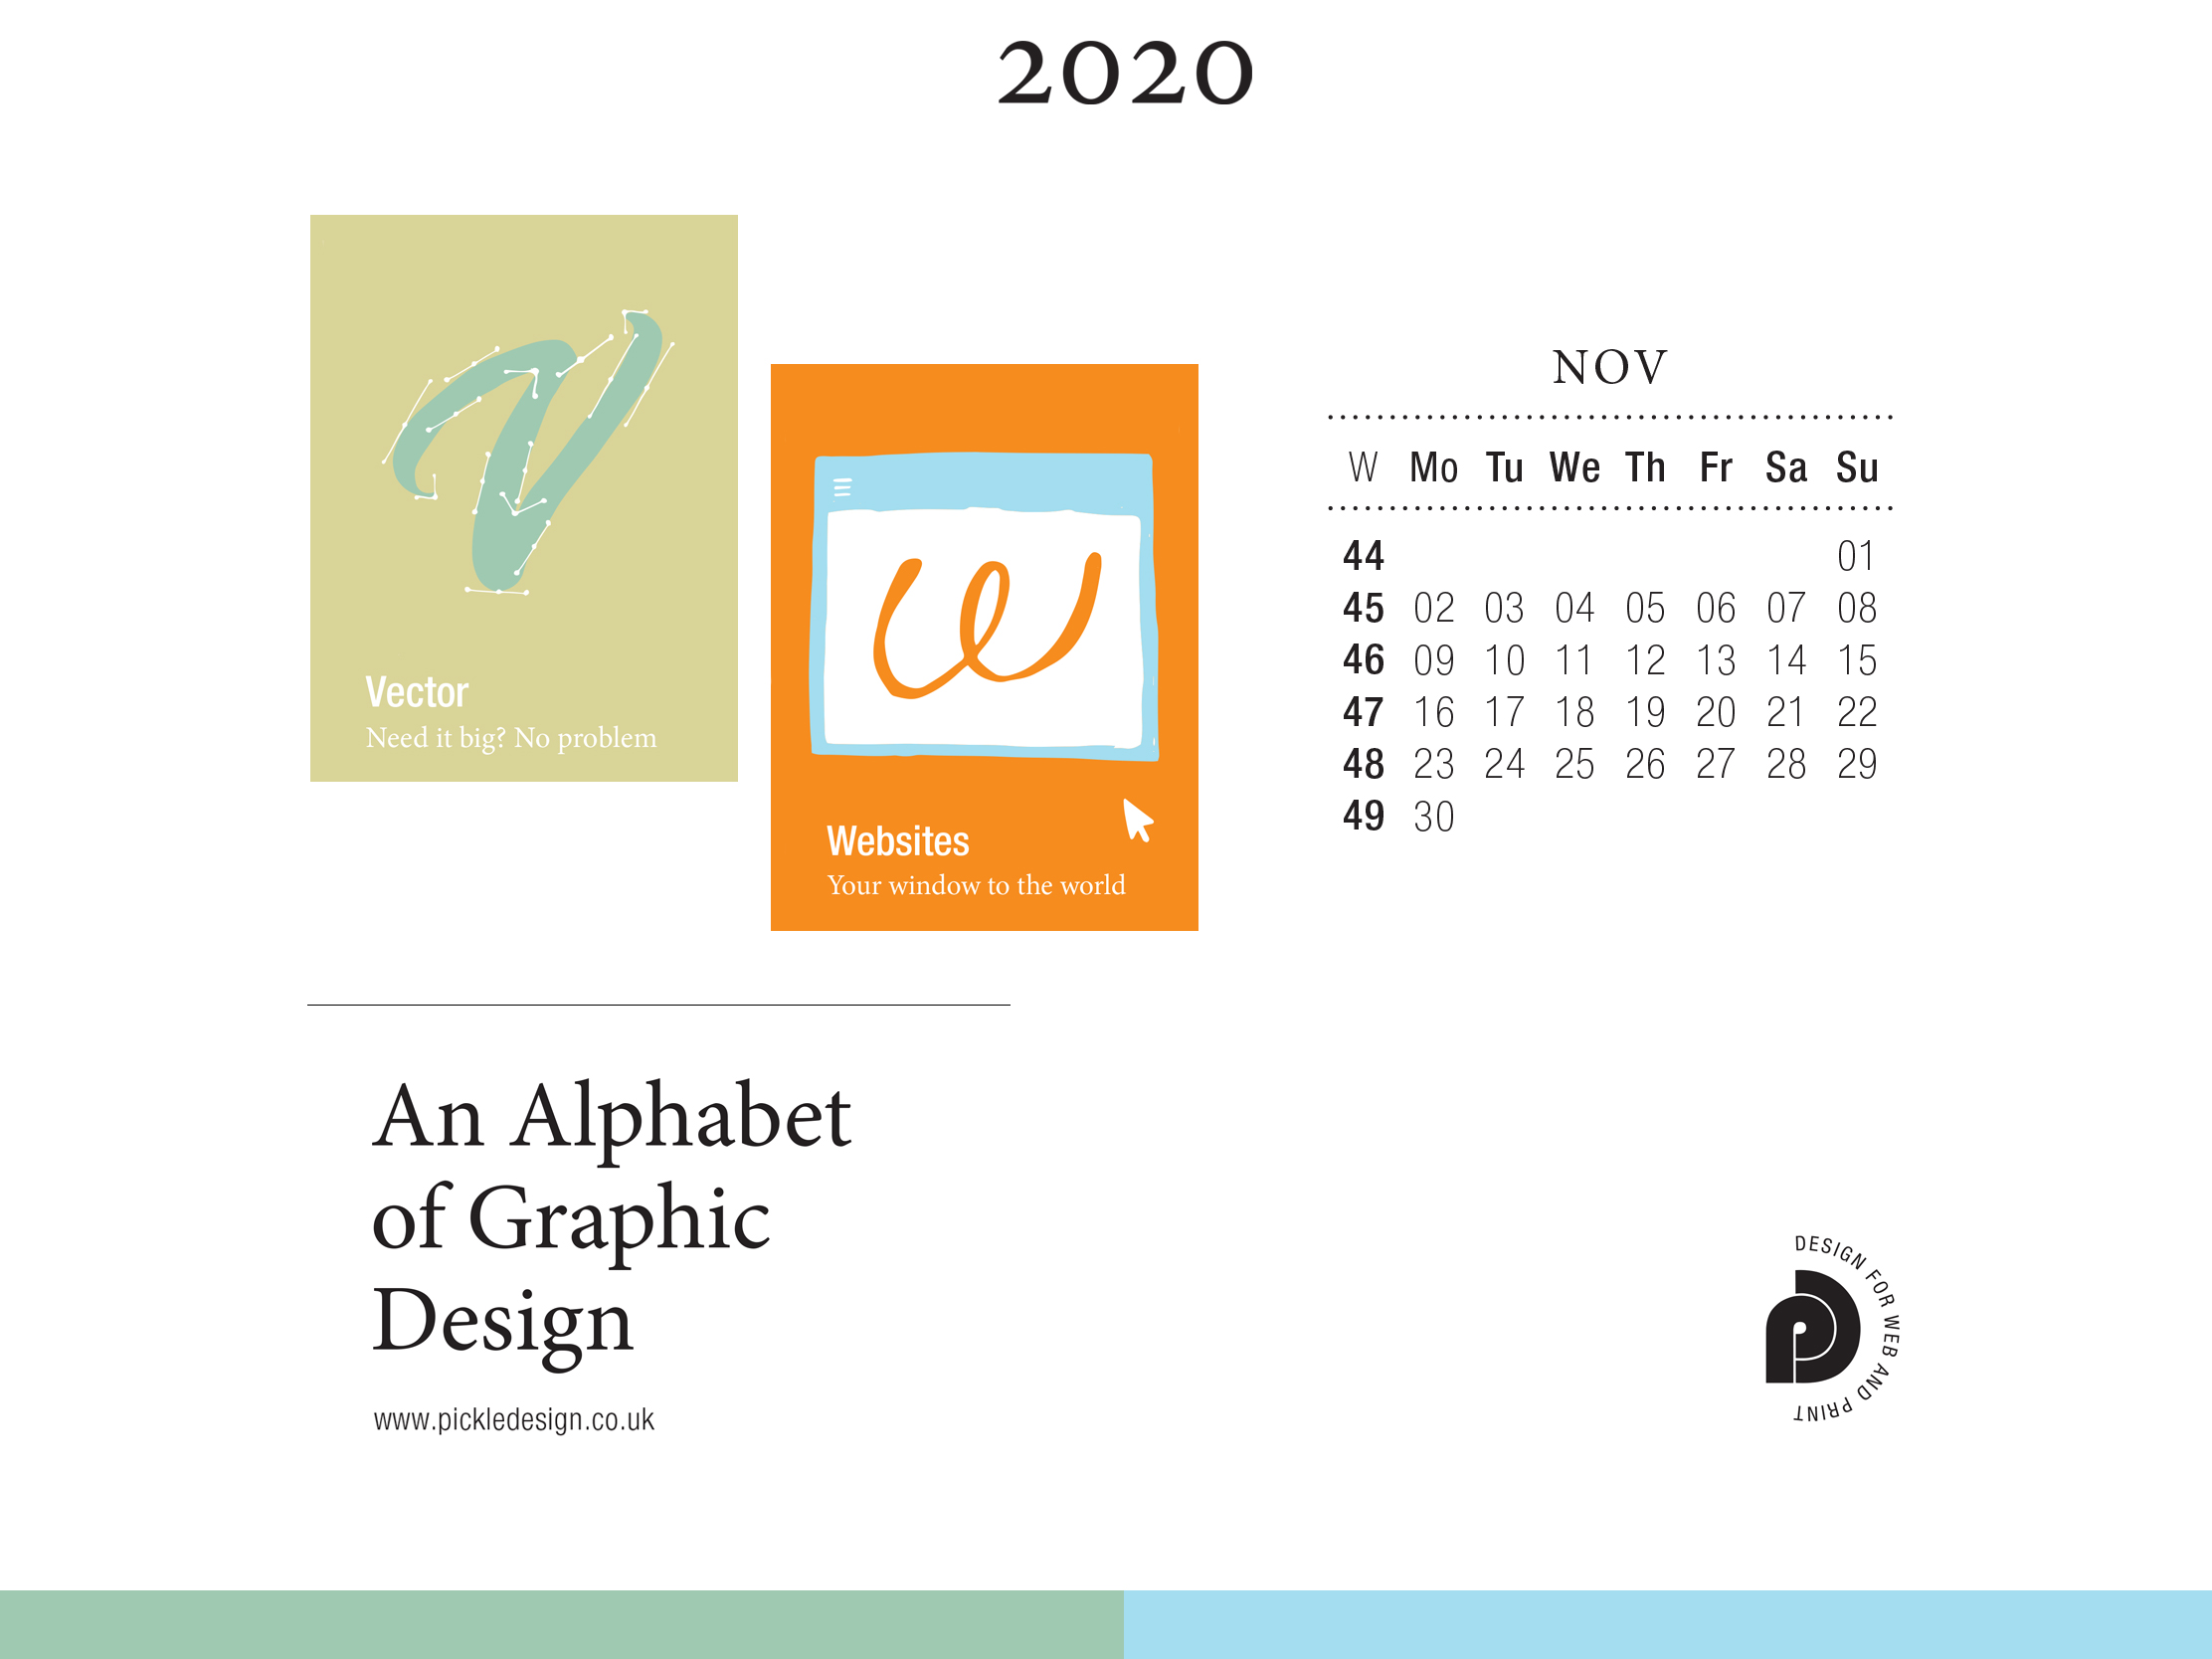 Download the month of November from our Alphabet of Graphic Design calendar for free for your mobile, tablet and desktop computer background